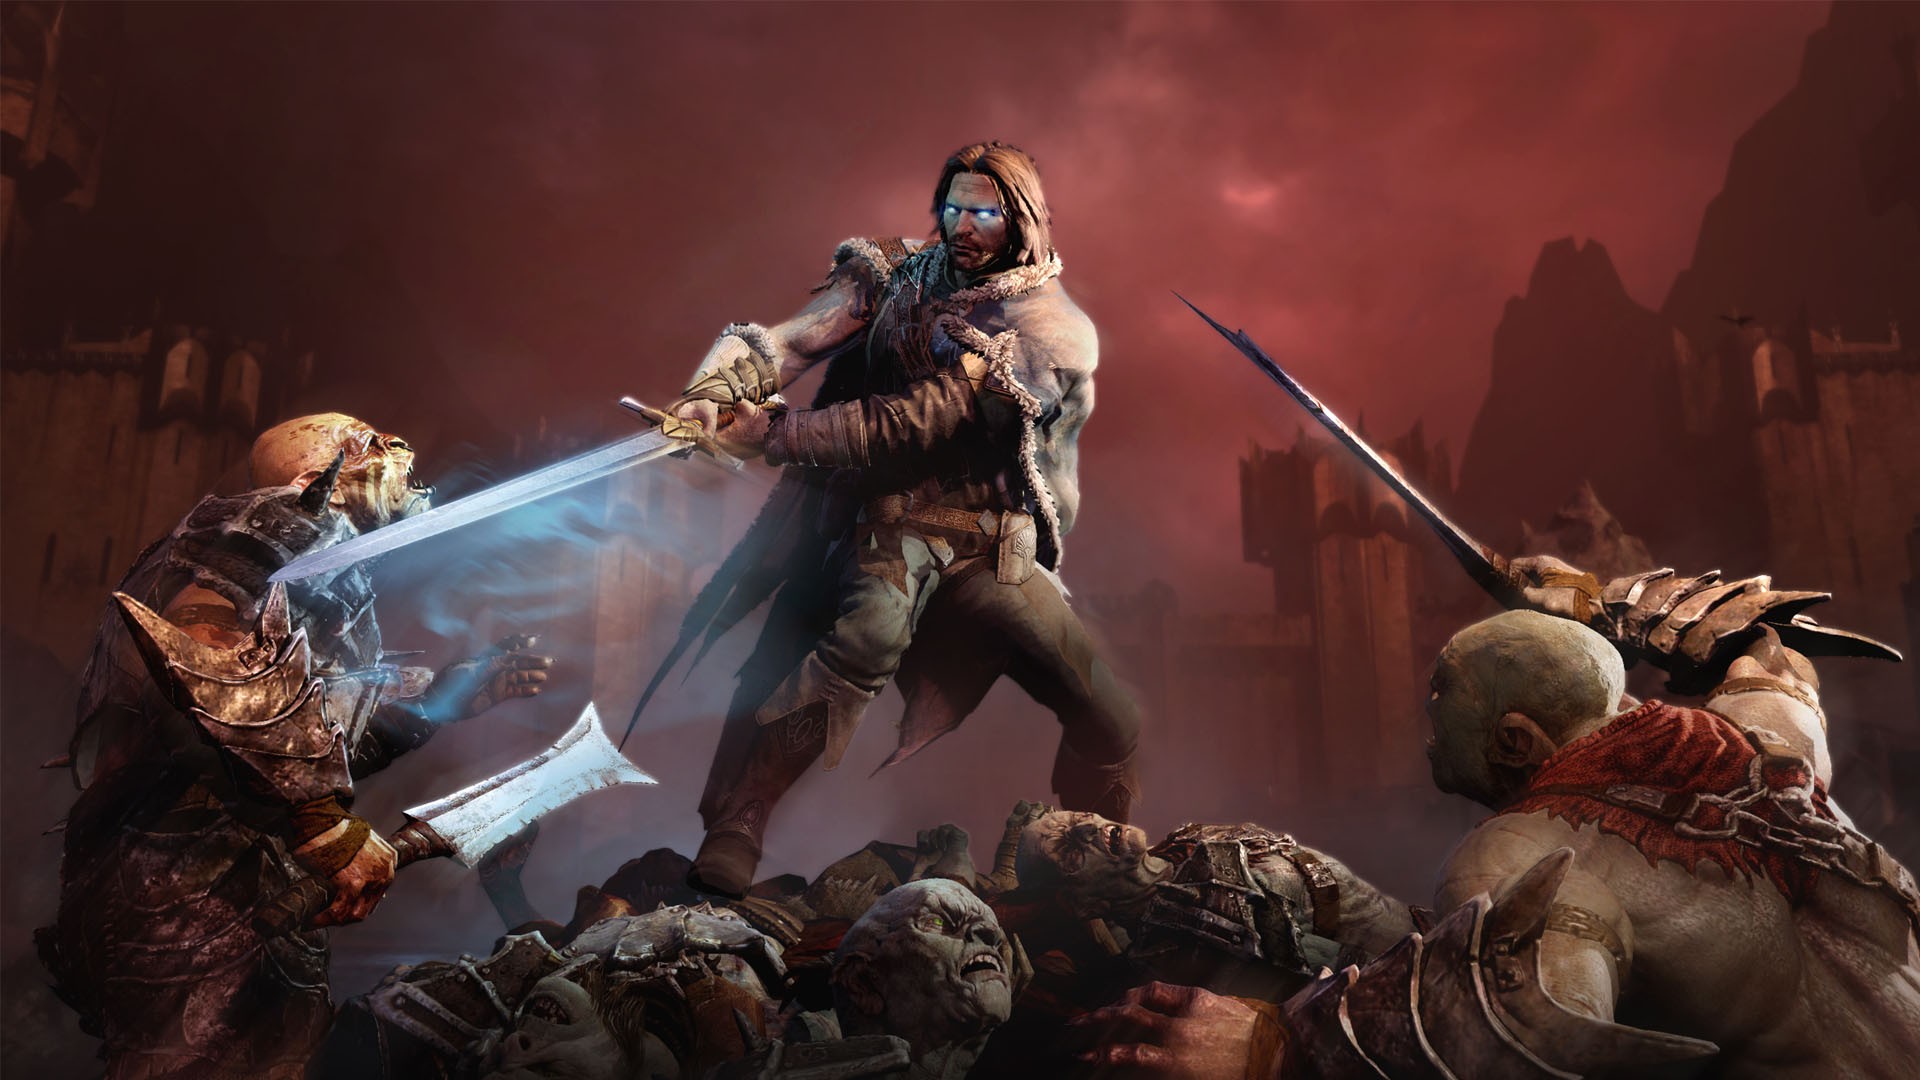 Jogo Middle-earth: Shadow of Mordor - Game of the Year Edition